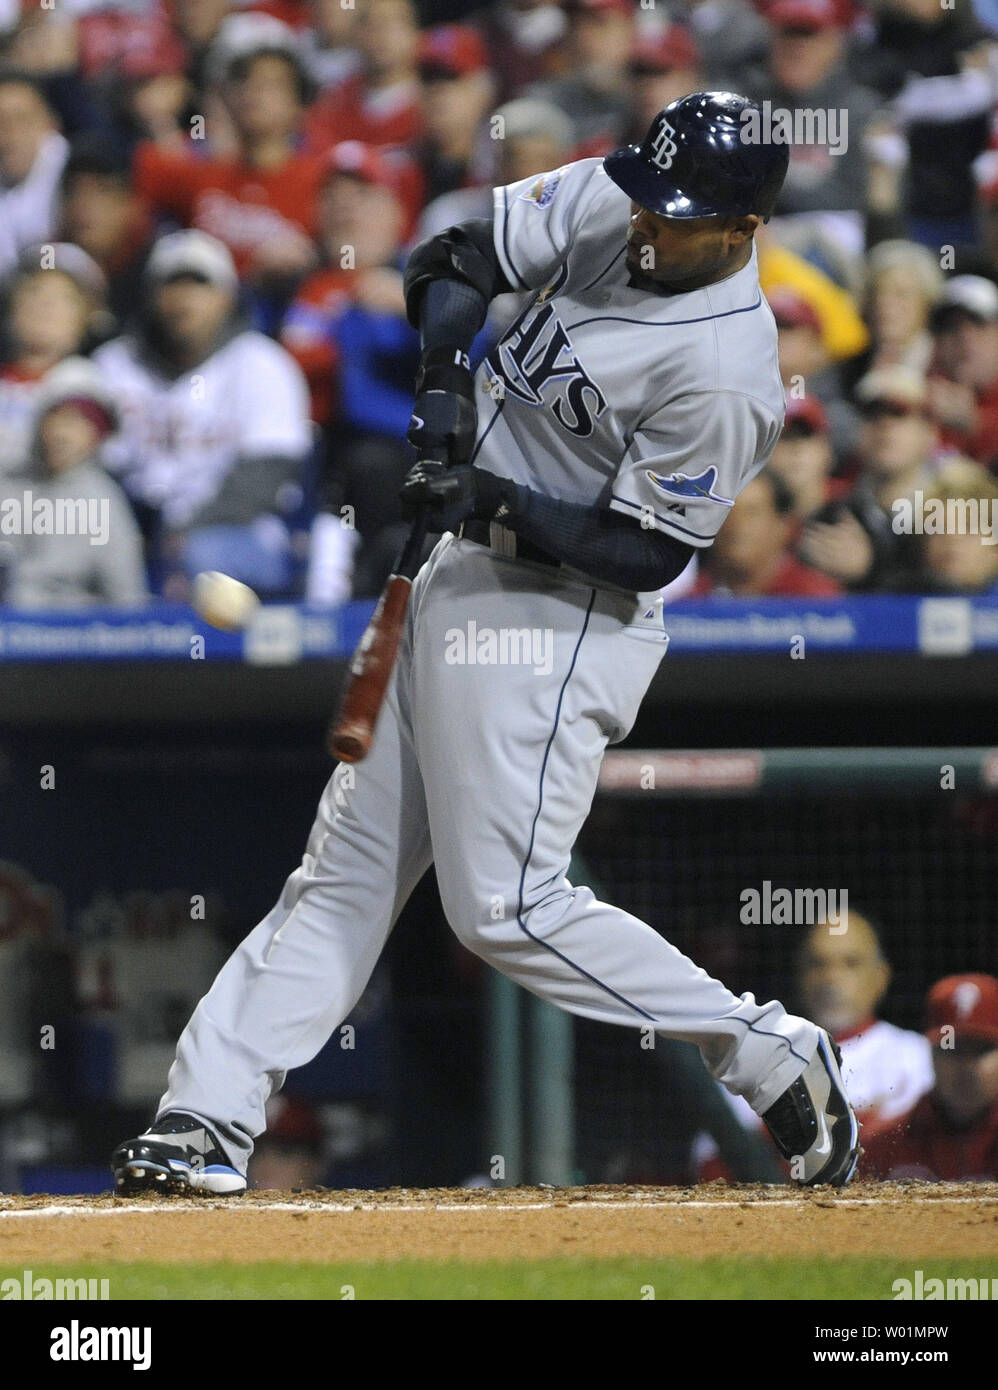 Tampa Bay Rays outfielder Carl Crawford connects for a solo home run  against the Philadelphia Phillies during the fourth inning of game 4 of the  World Series at Citizens Bank Park in